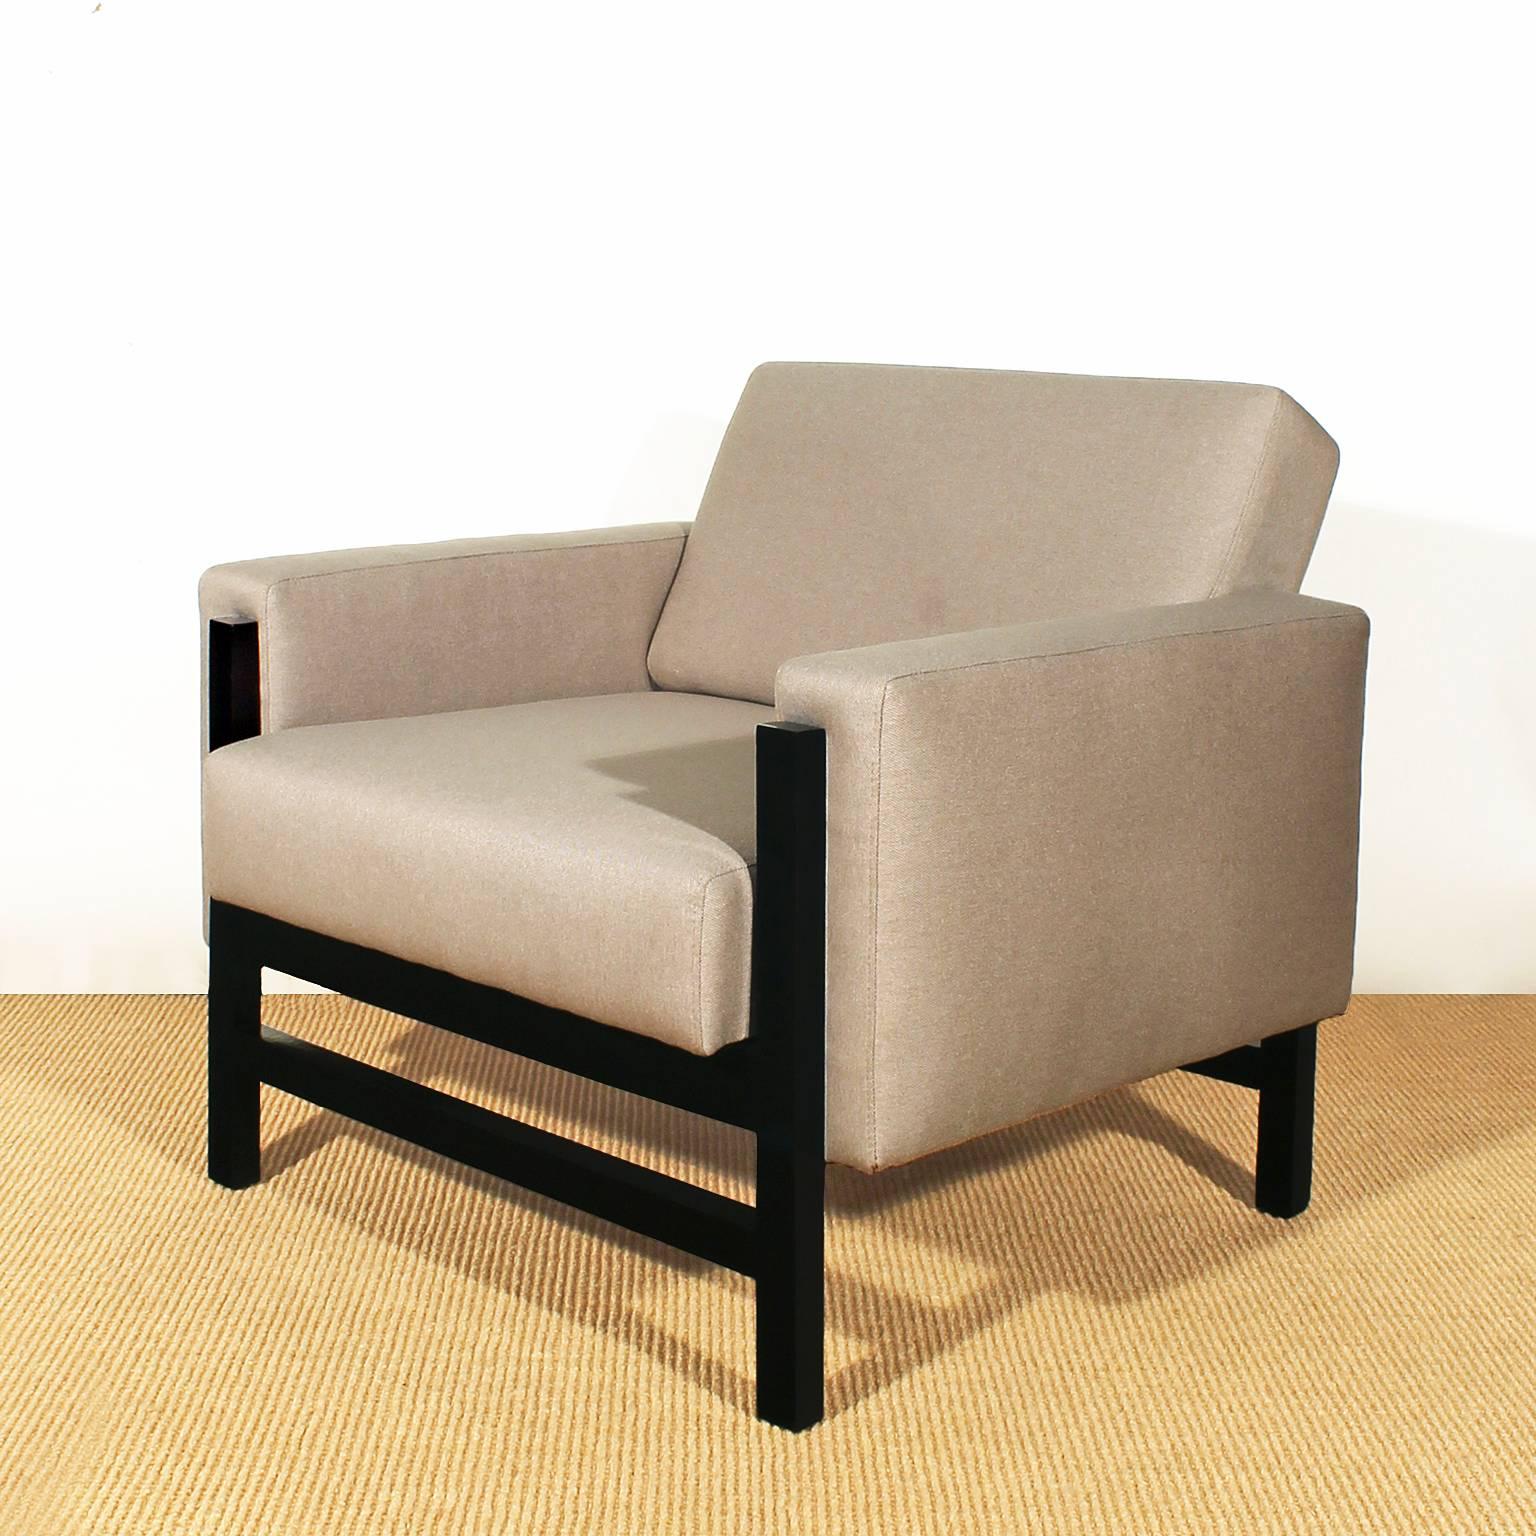 Mid-Century Modern Pair of Cubist Armchairs from the 1960s